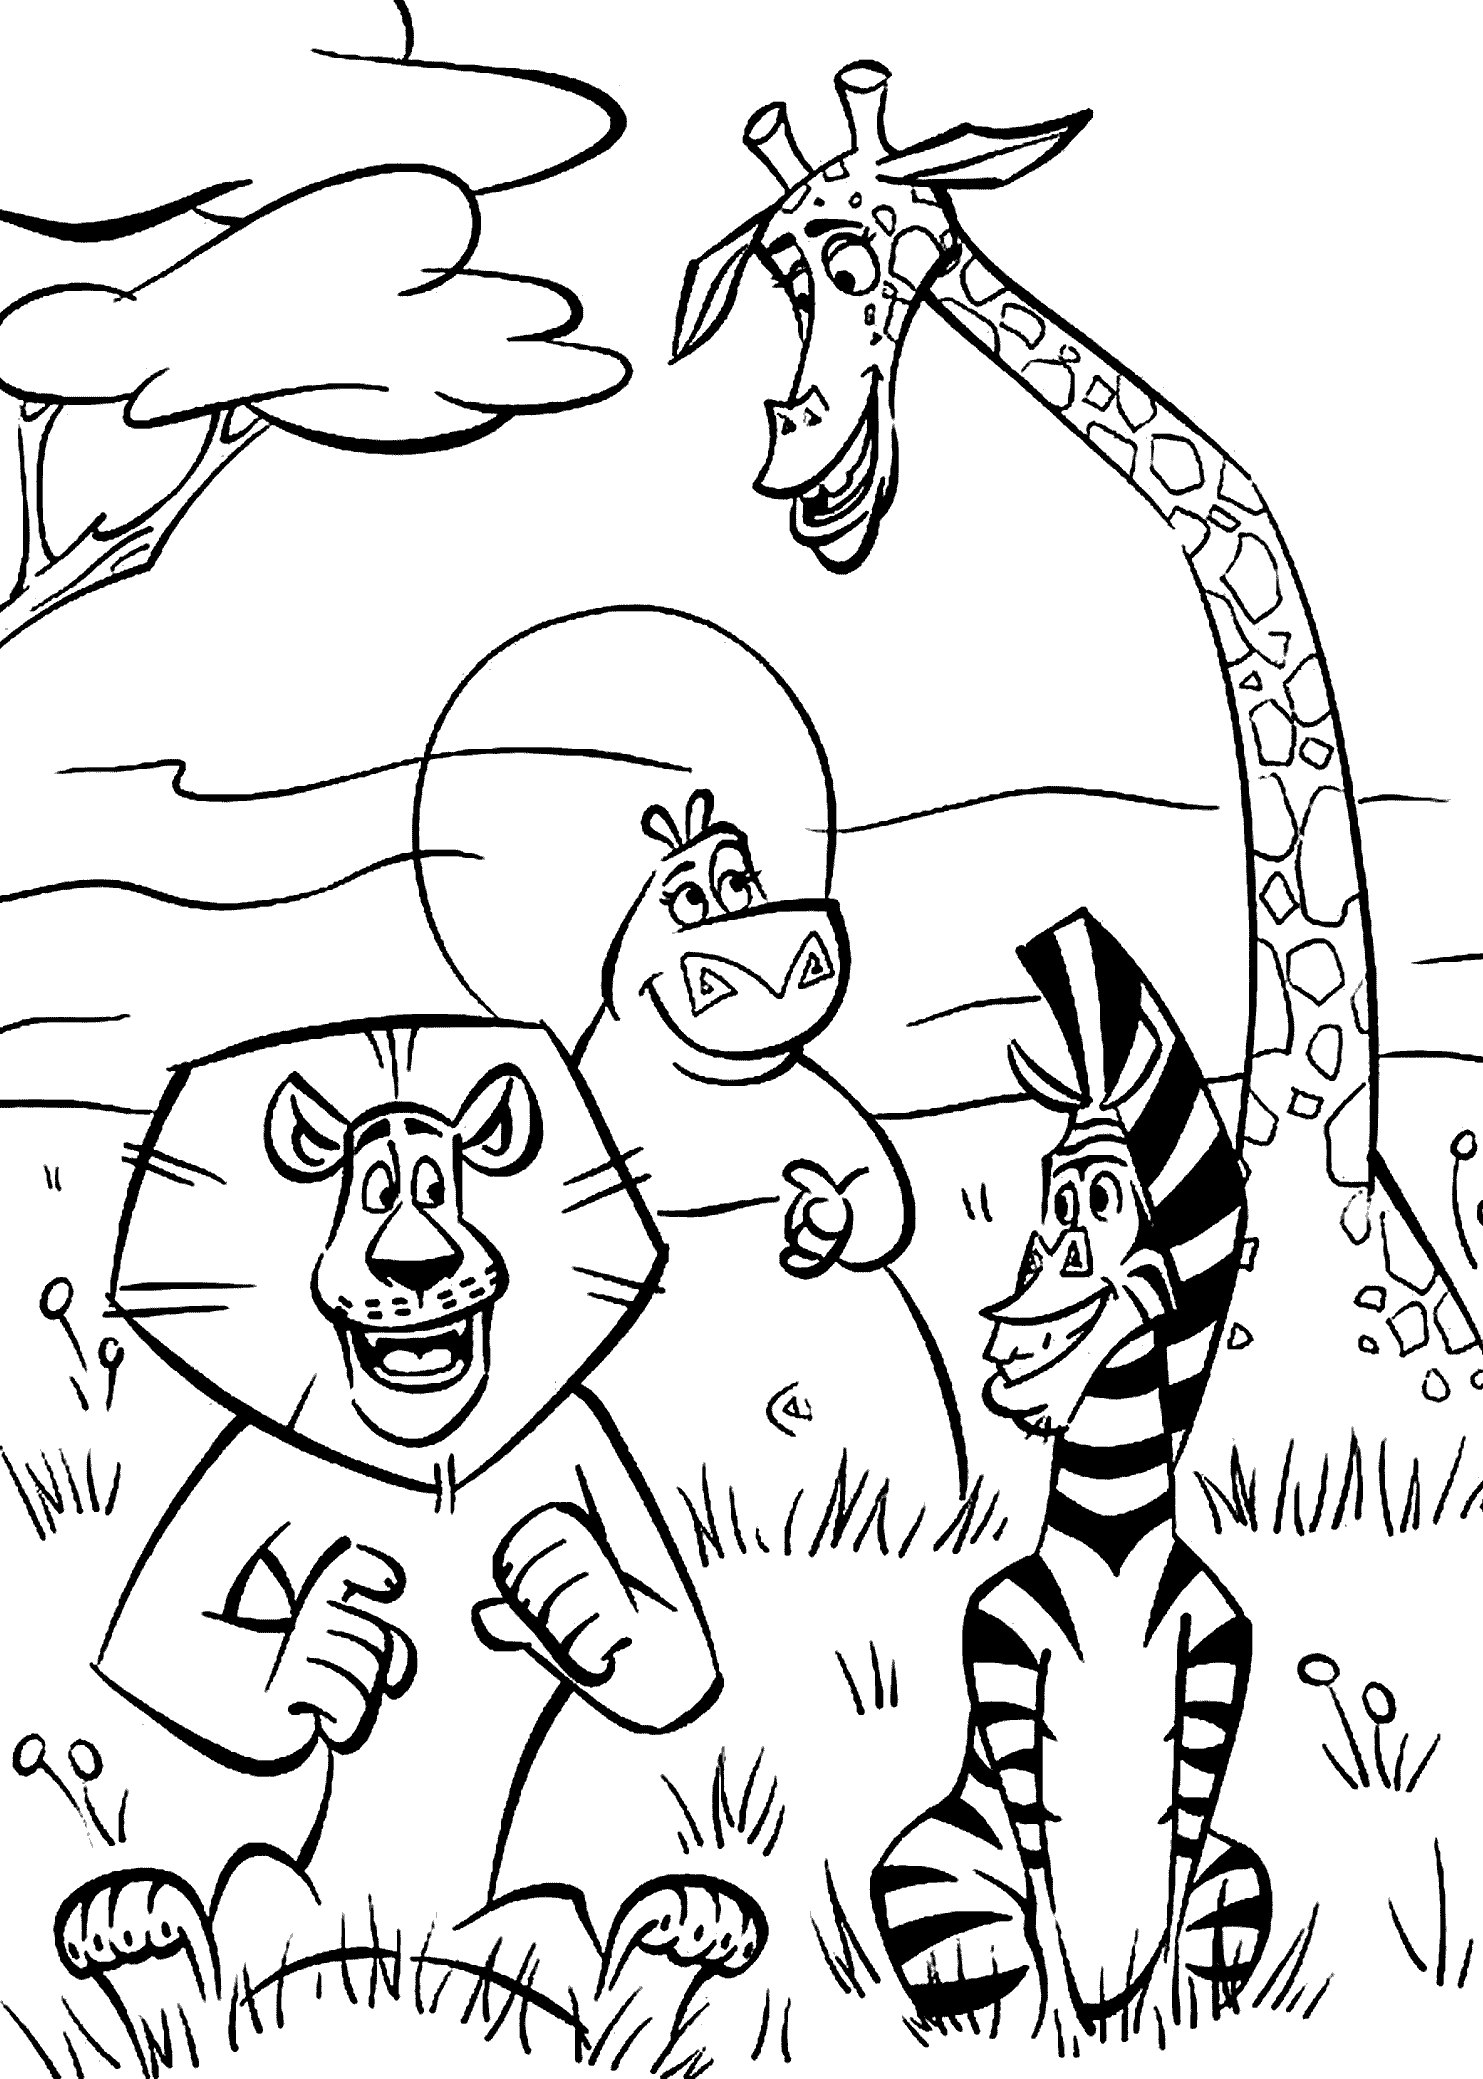 Animals madagascar coloring pages for kids printable free animals silly animals animal mashups animaâ cartoon coloring pages coloring pages flag coloring pages